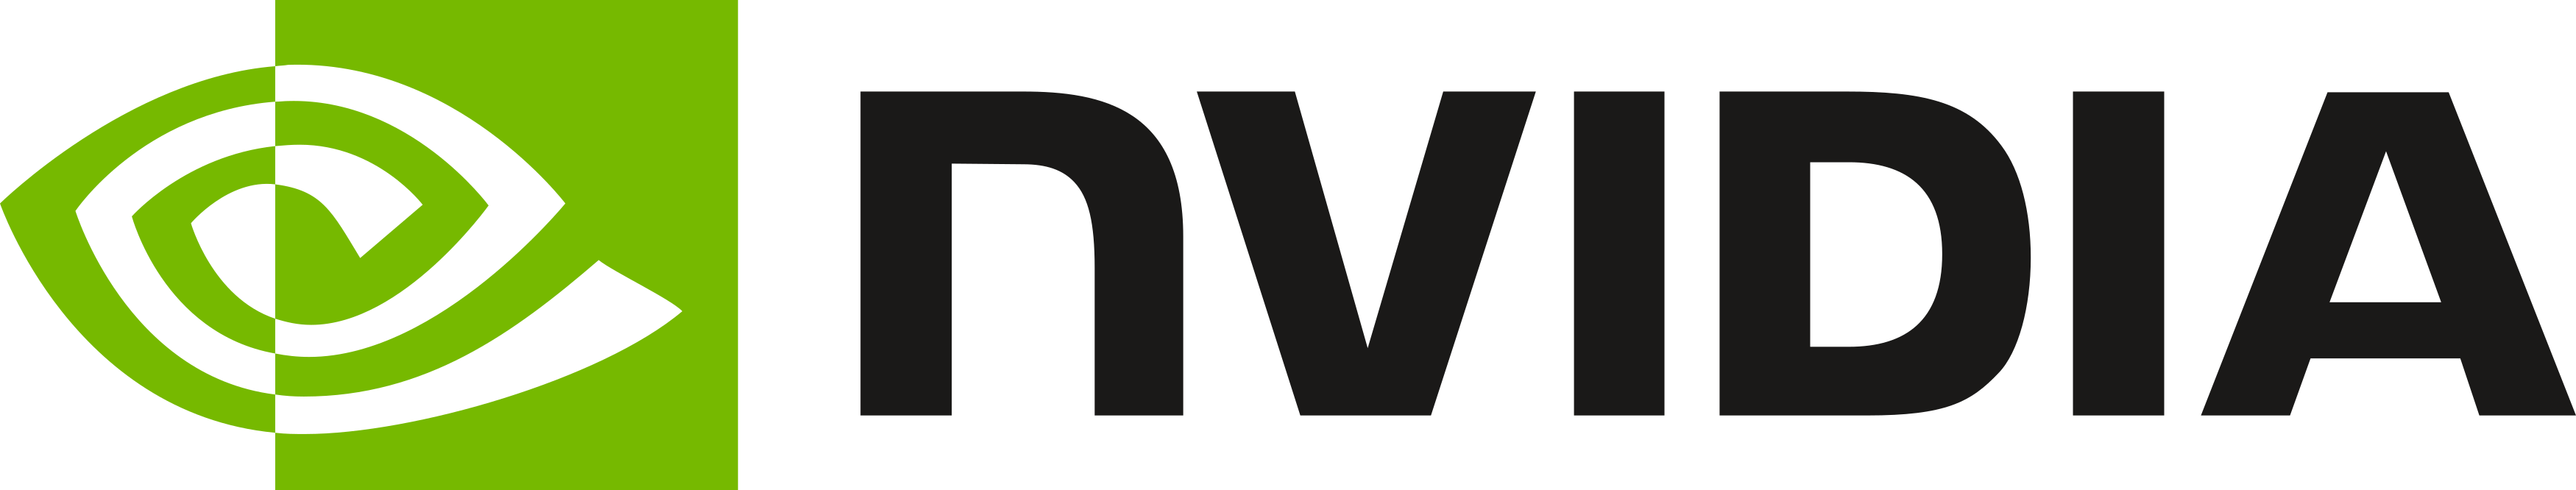 Nvidia Logo In Transparent Png And Vectorized Svg For vrogue.co